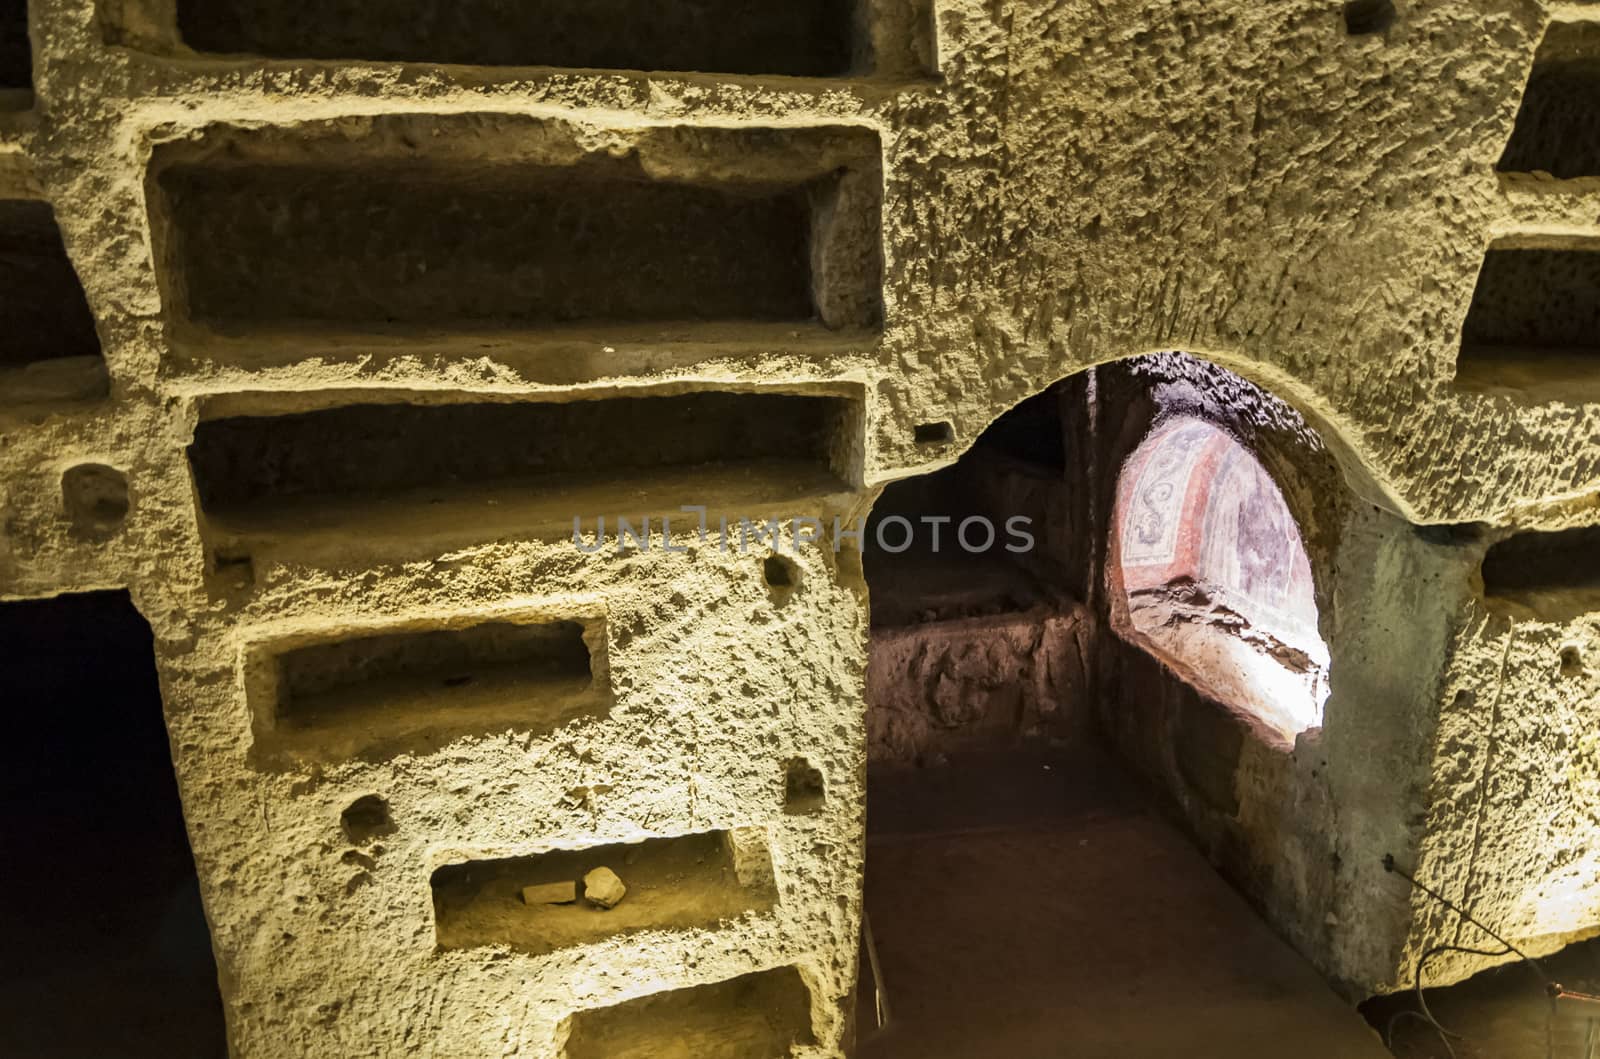 Catacombs of San Gennaro in Naples, Italy by edella